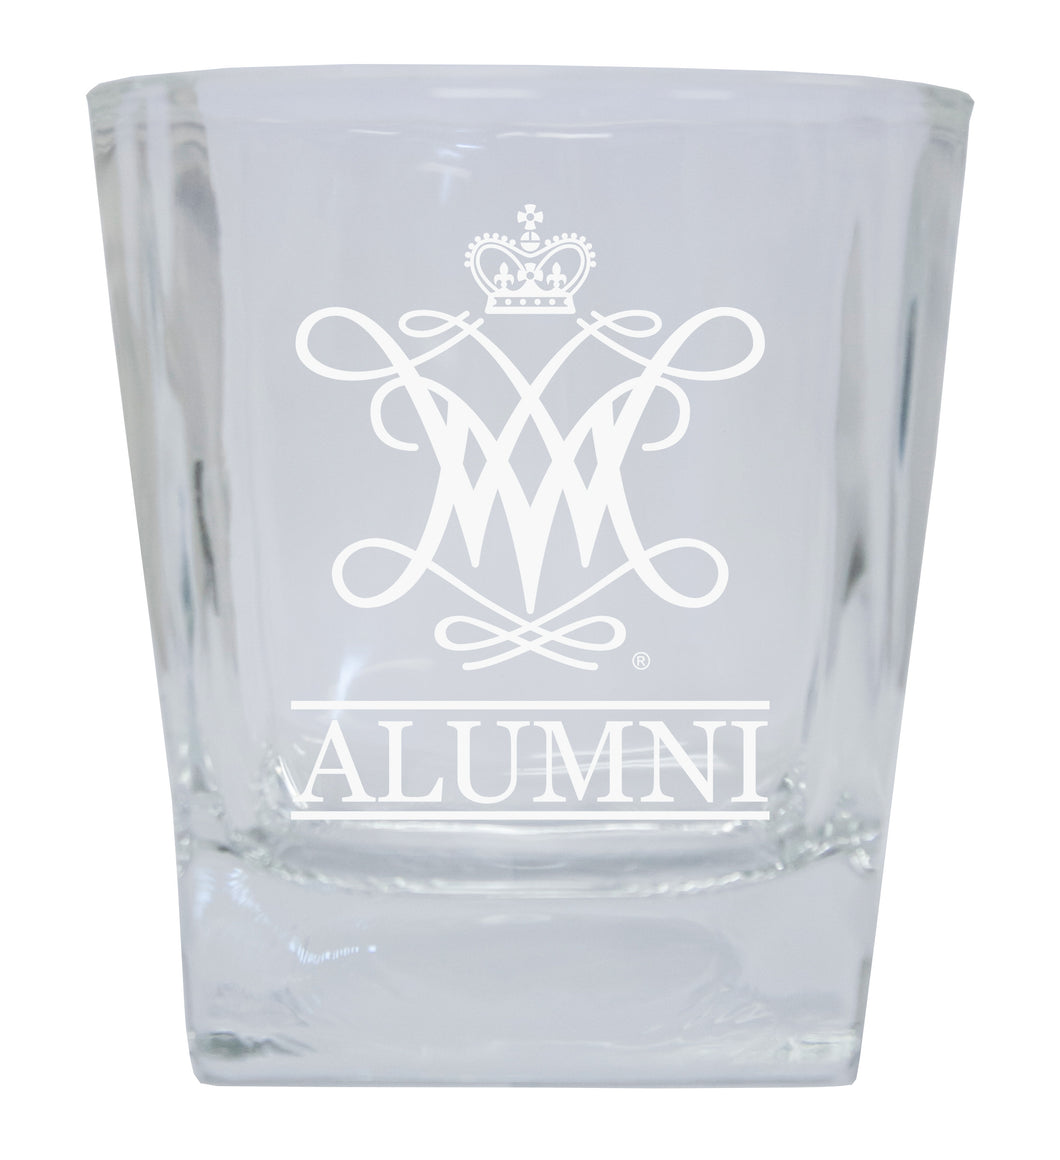 William and Mary Alumni Elegance - 5 oz Etched Shooter Glass Tumbler 4-Pack